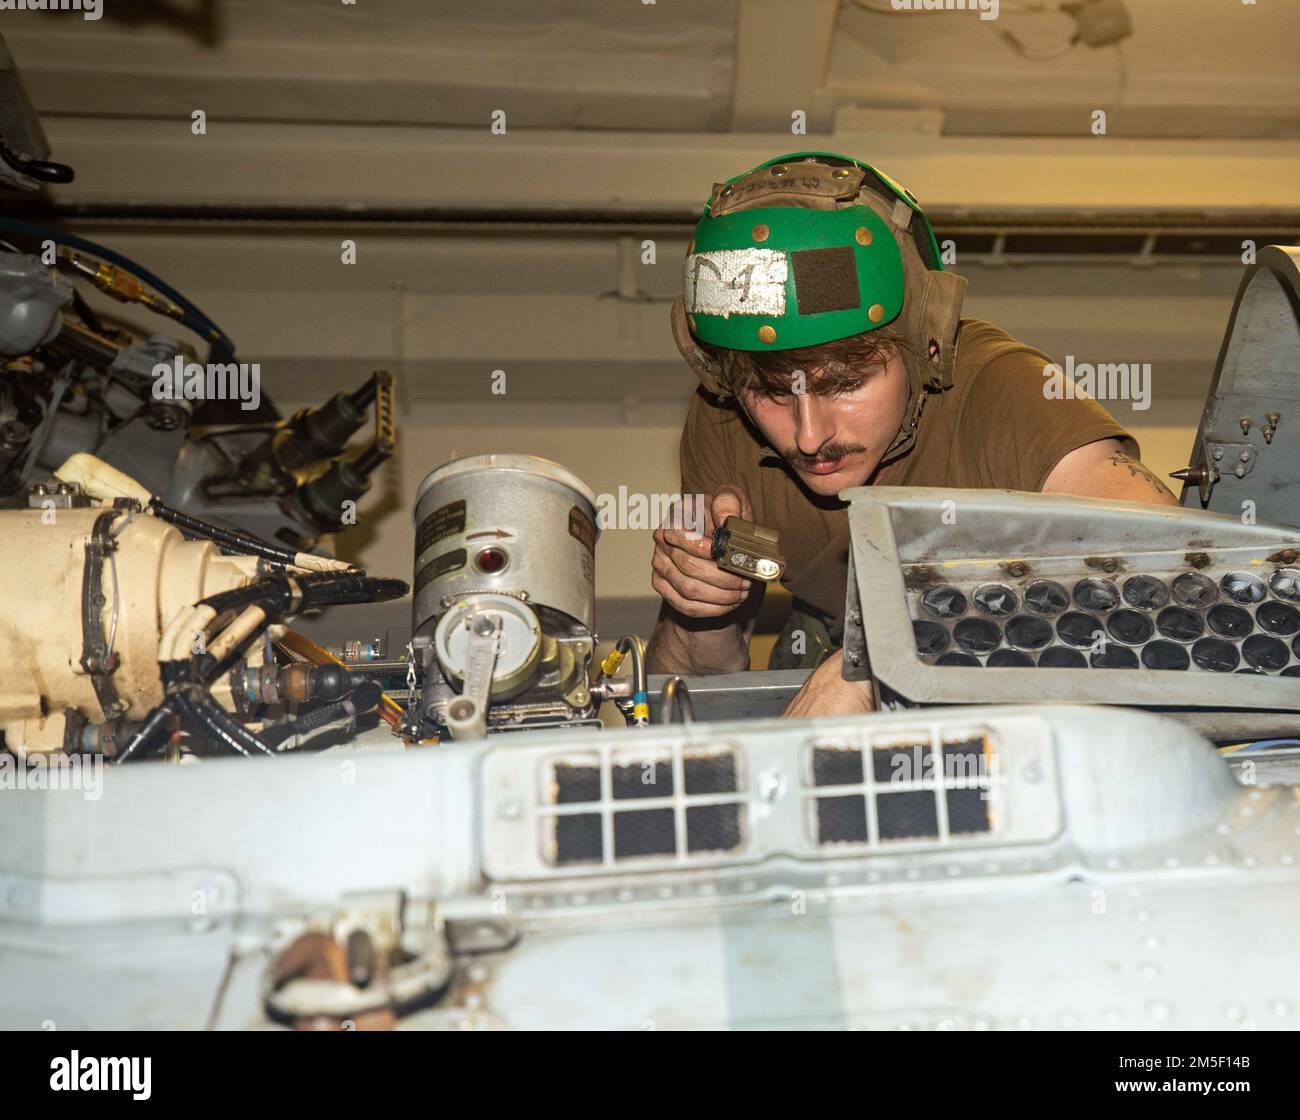 PHILIPPINE SEA (March 9, 2022) Aviation Structural Mechanic Airman Kyle Evers, from Jacksonville, Fl., conducts maintenance on an MH-60R helicopter aboard Arleigh Burke-class guided-missile destroyer USS Ralph Johnson (DDG 114). Ralph Johnson is assigned to Task Force 71/Destroyer Squadron (DESRON) 15, the Navy’s largest forward-deployed DESRON and the U.S. 7th fleet’s principal surface force. Stock Photo